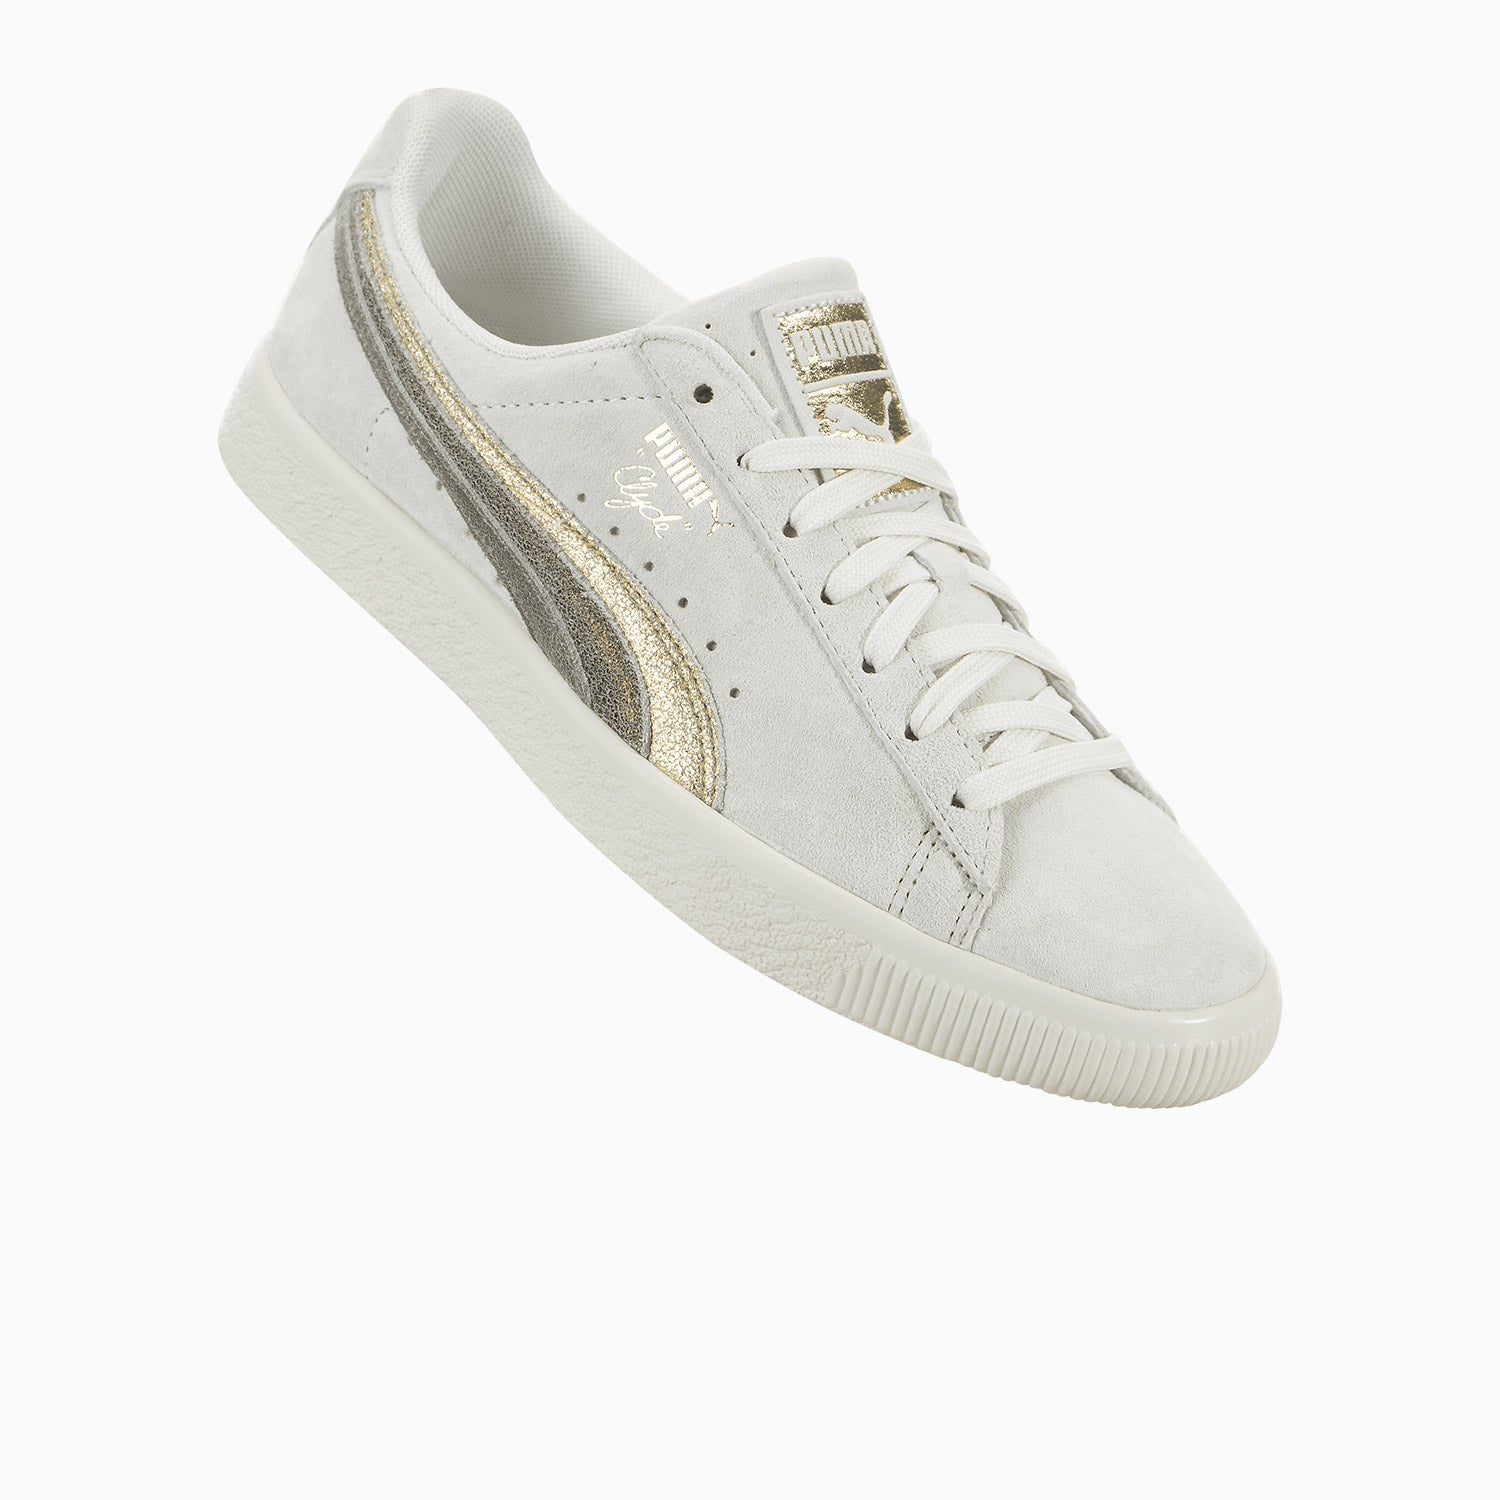 Puma Women's Clyde Metal Leather 